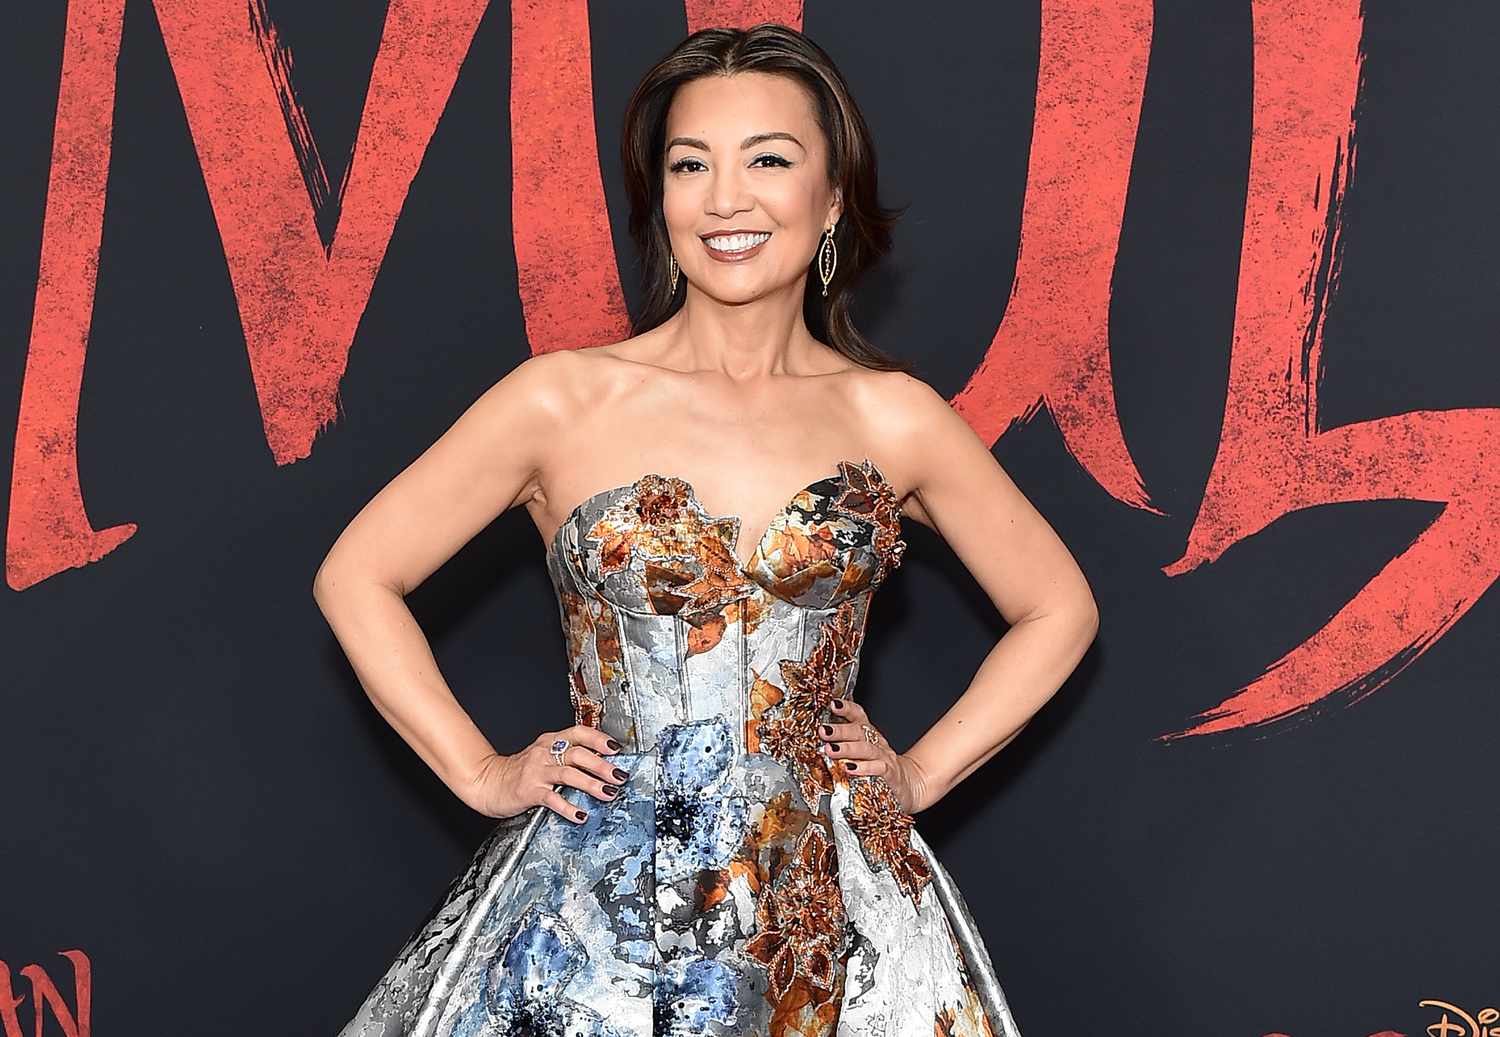 The Book of Boba Fett's Ming-Na Wen Says Facing Adversity Made Her 'Fearless'